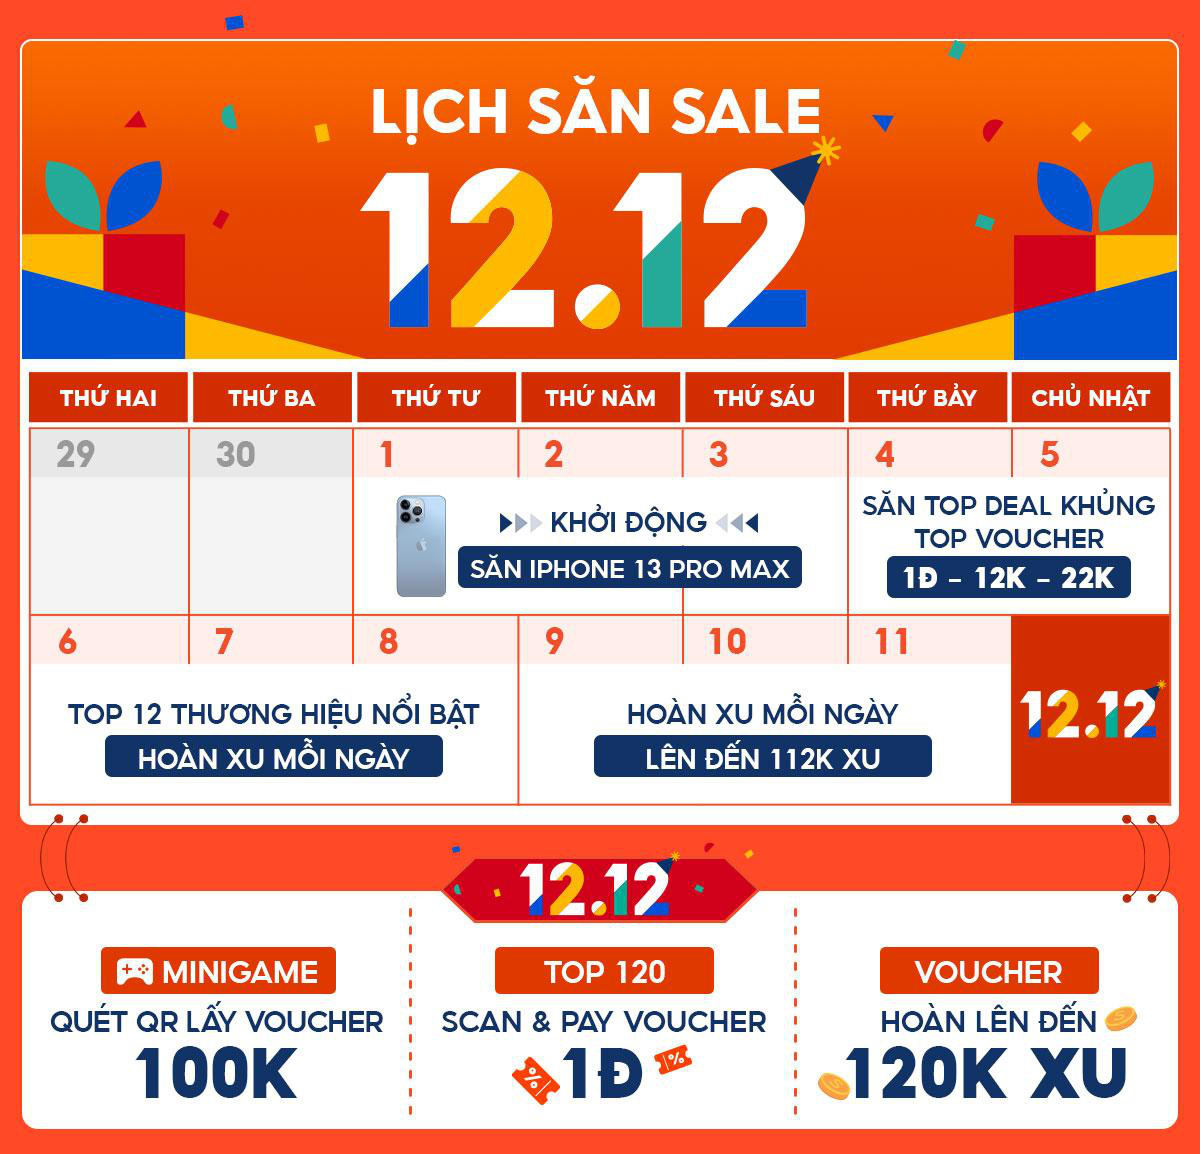 12.12 Super Sale The birthday is coming, hunt for online sales, don't forget the Scan & Pay series of offers 